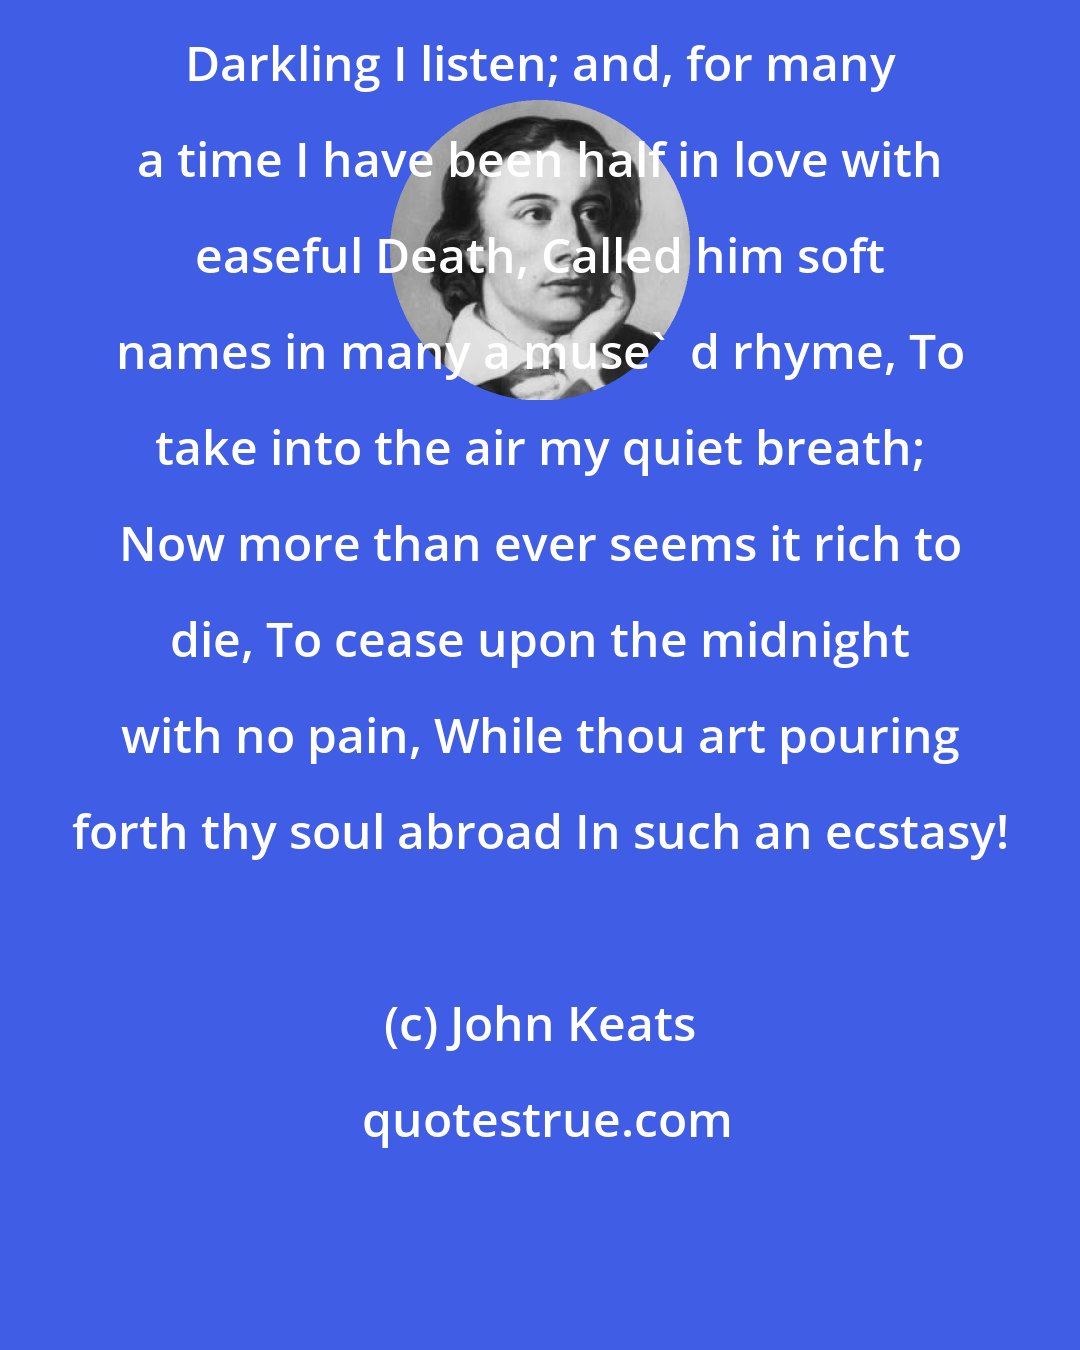 John Keats: Darkling I listen; and, for many a time I have been half in love with easeful Death, Called him soft names in many a muse'  d rhyme, To take into the air my quiet breath; Now more than ever seems it rich to die, To cease upon the midnight with no pain, While thou art pouring forth thy soul abroad In such an ecstasy!